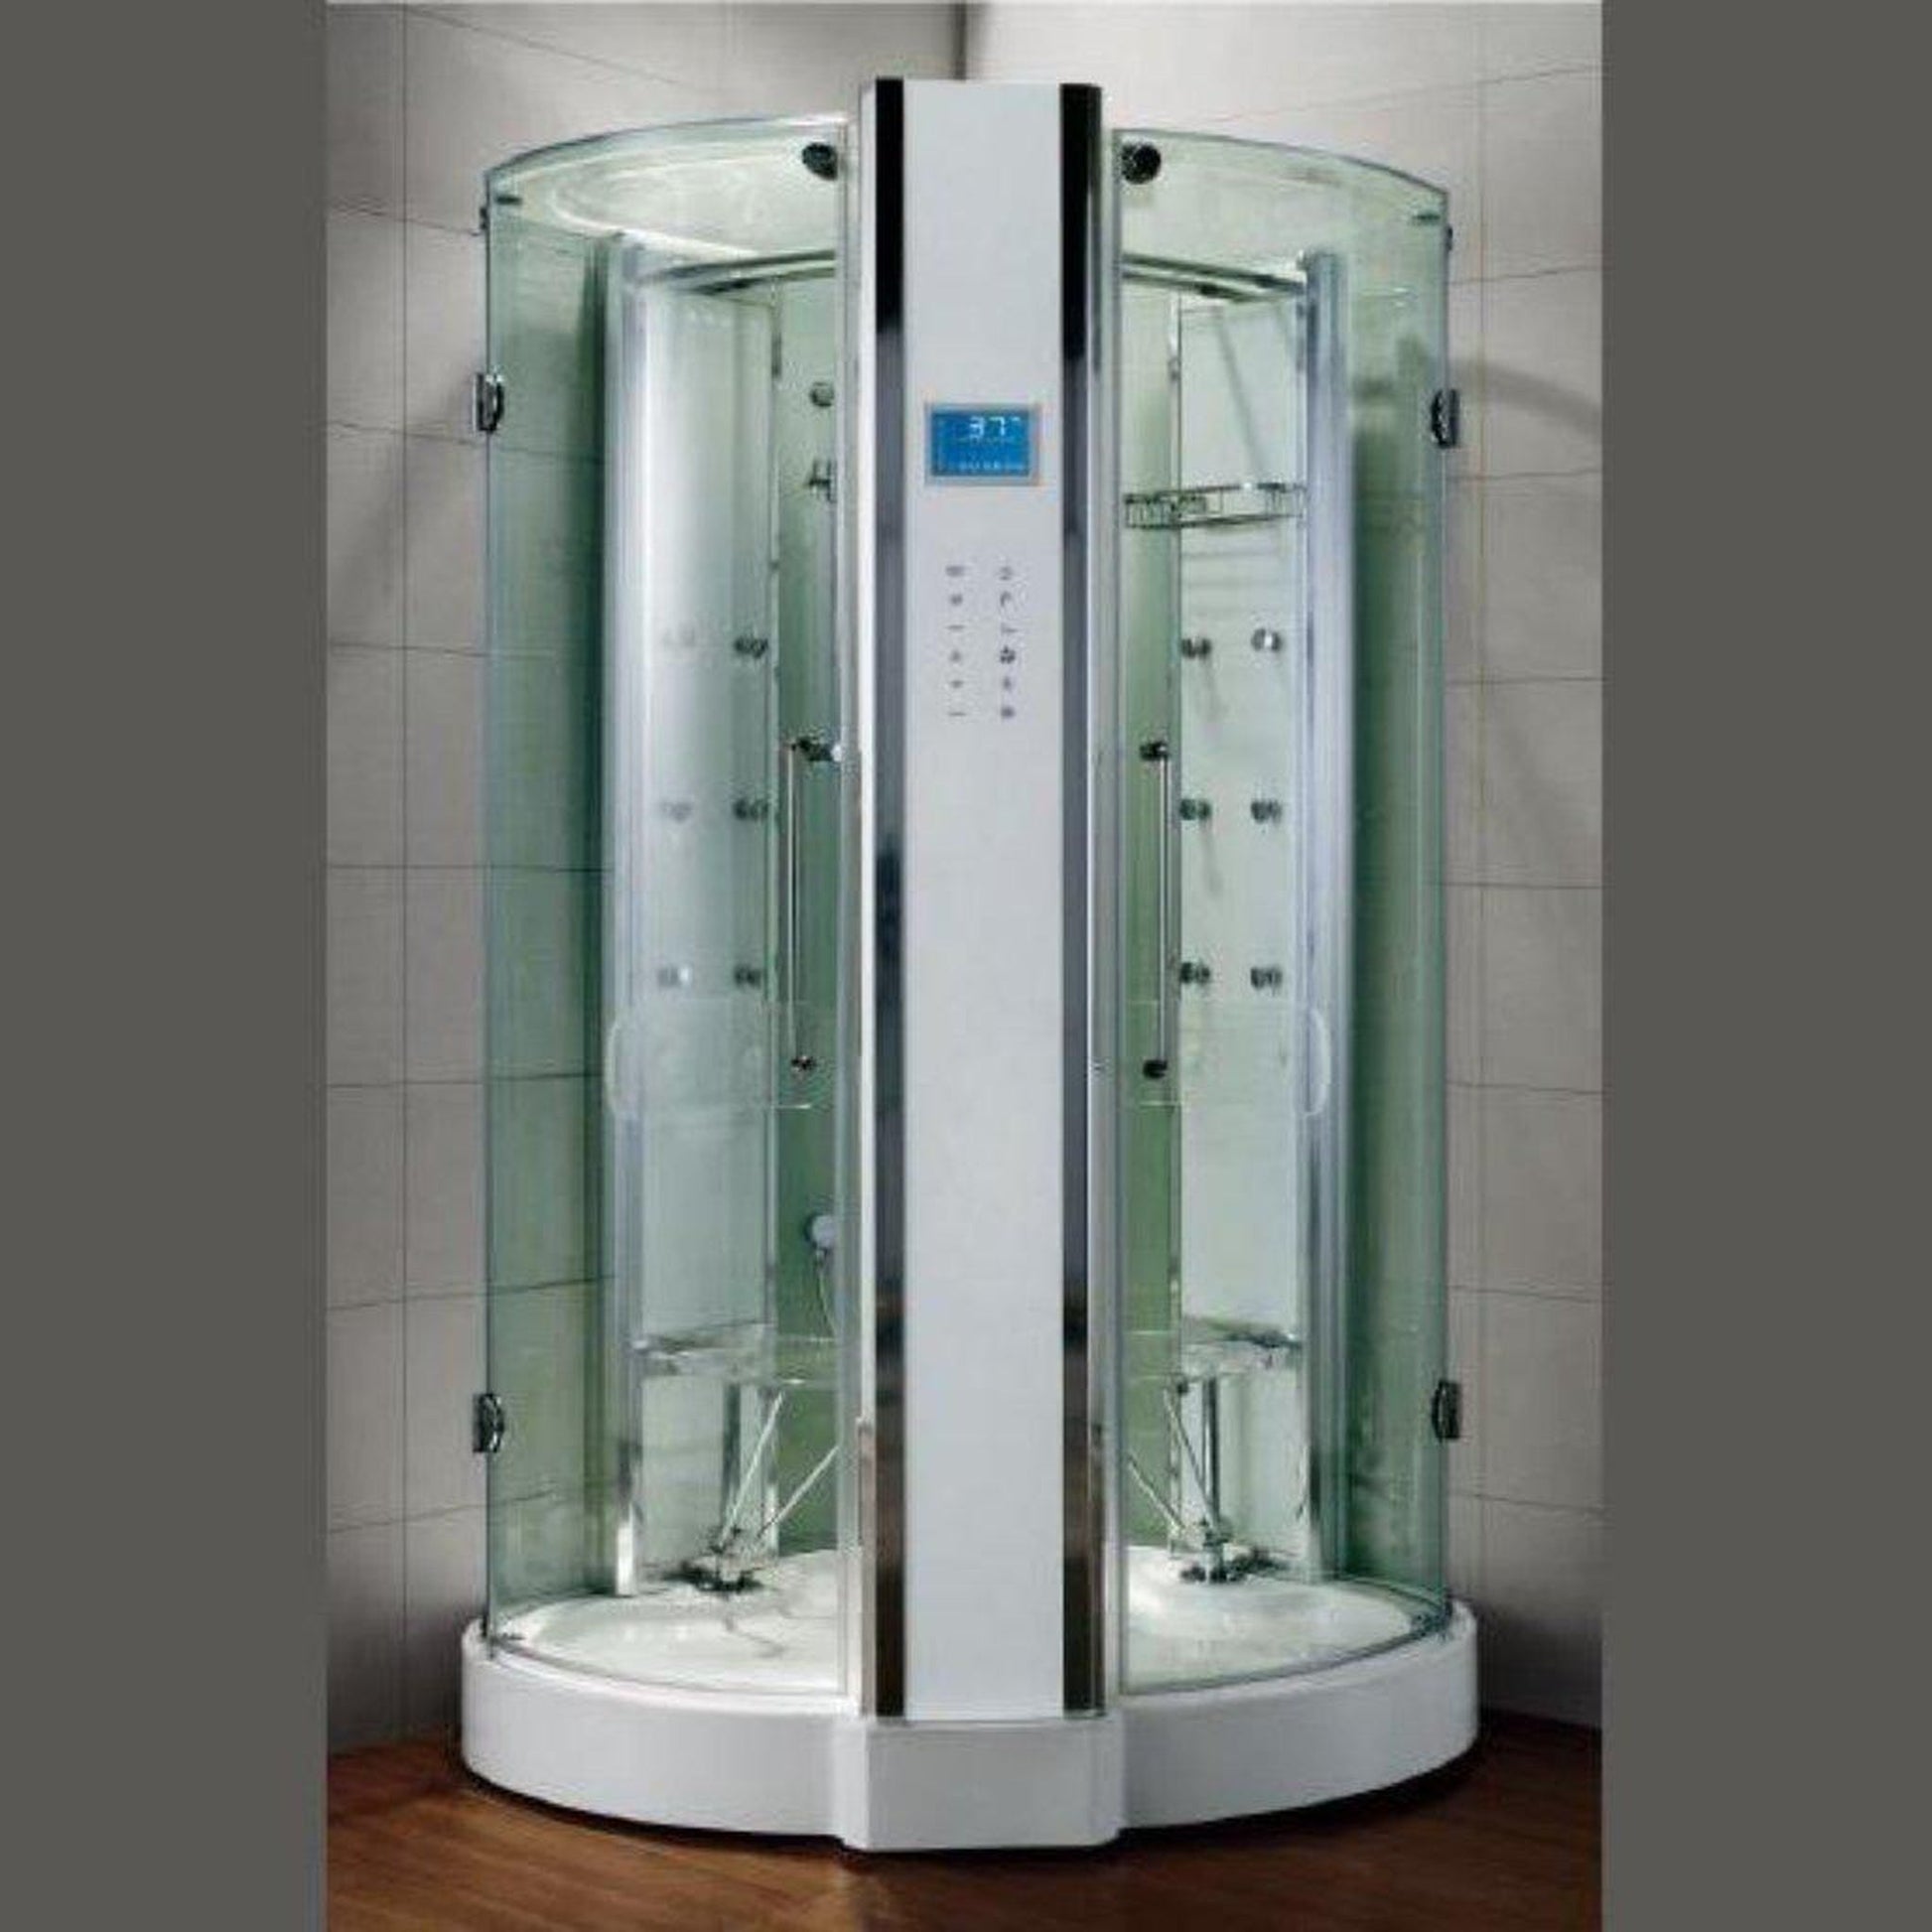 Athena 53" x 53" x 90" Two Person Corner Steam Shower With Dual Hinged Doors 12 Massage Jets & LED Chromatherapy Lighting